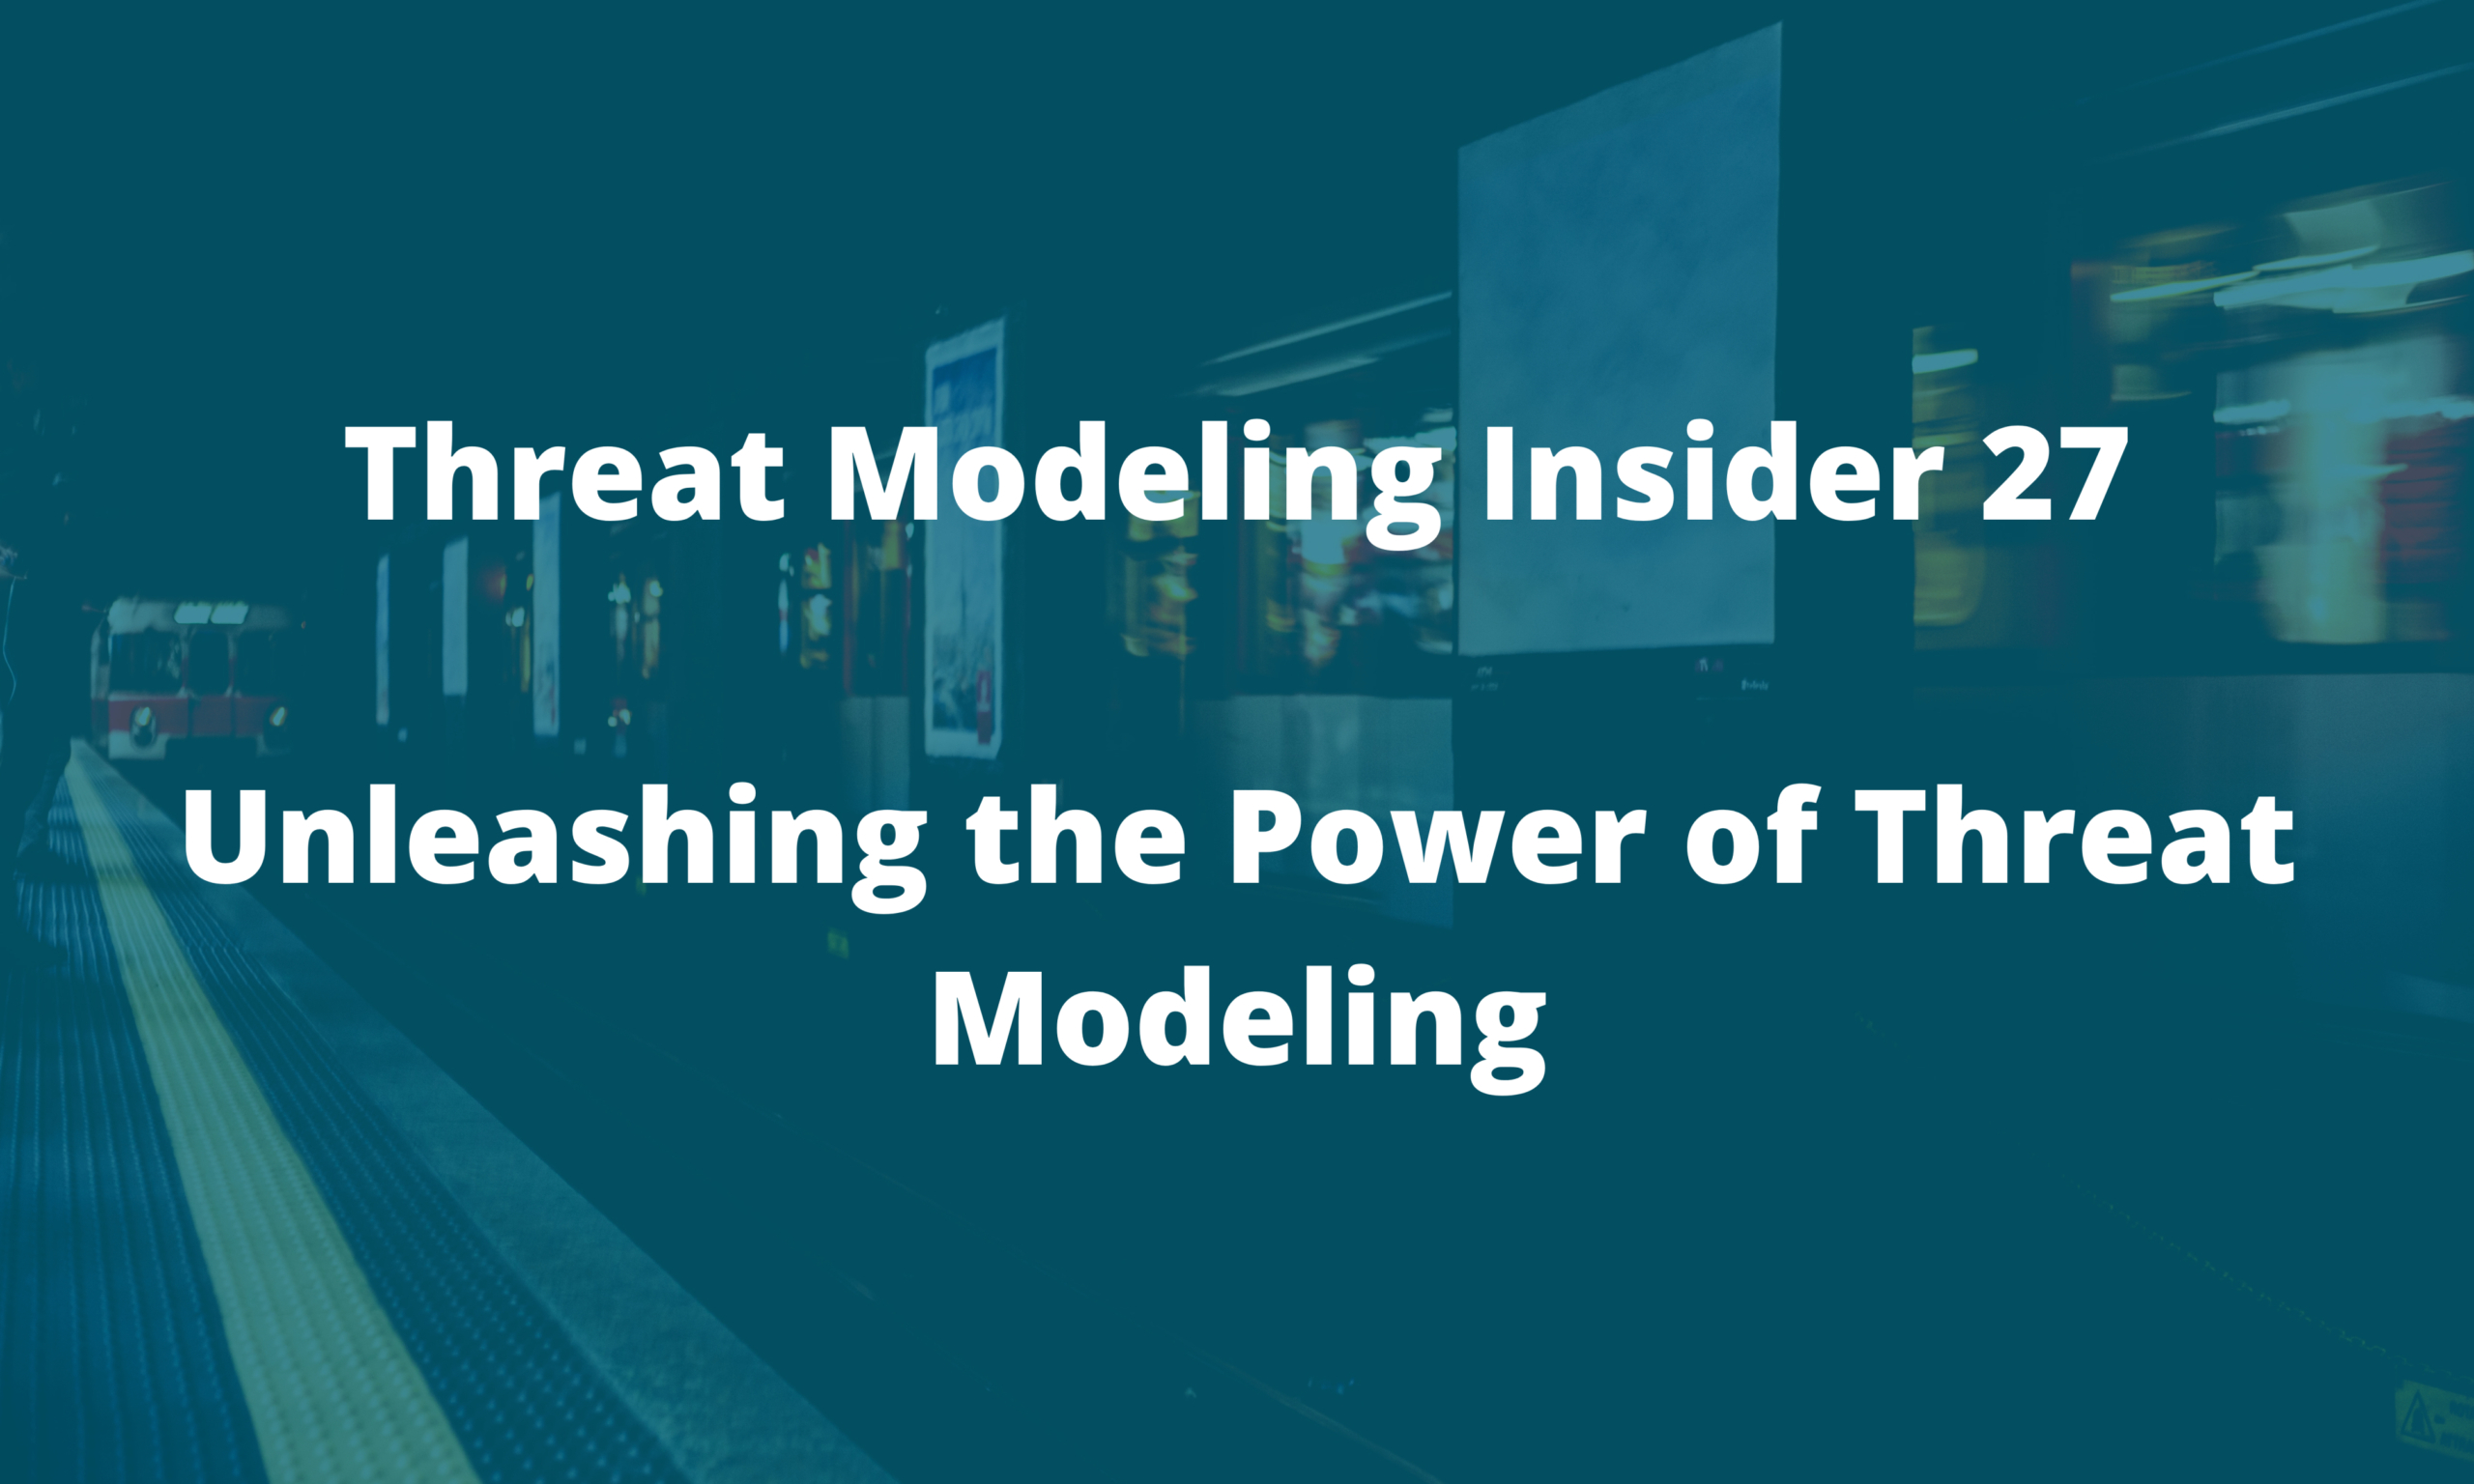 TMI newsletter 27 – Unleashing the Power of Threat Modeling: Overcoming Challenges, Building Community, and Driving Adoption